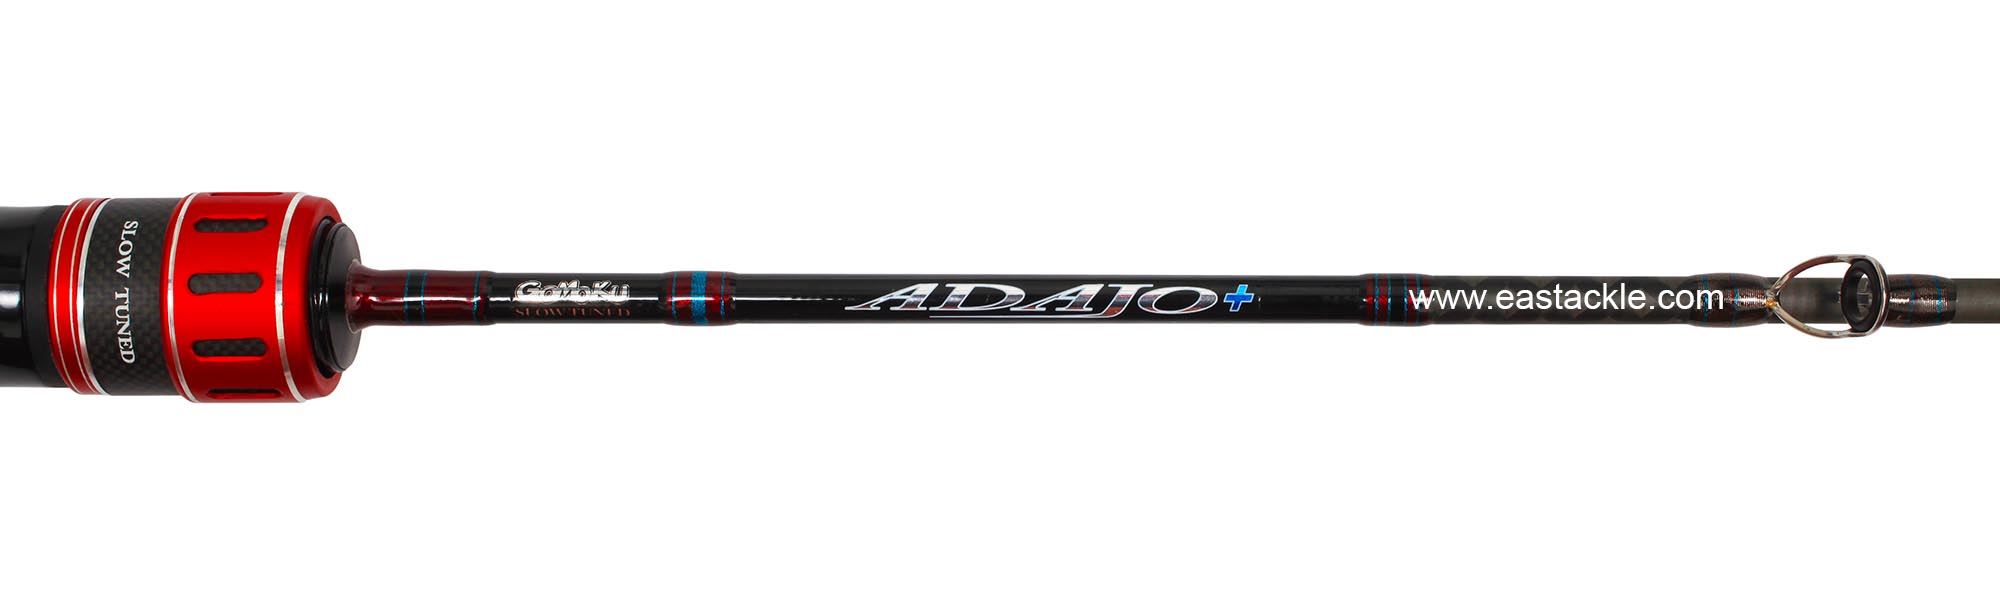 Storm - Adajo+ - AJP631-2 - Slow Jigging Fishing Rod - Fore Grip Locking Nut and Logo | Eastackle